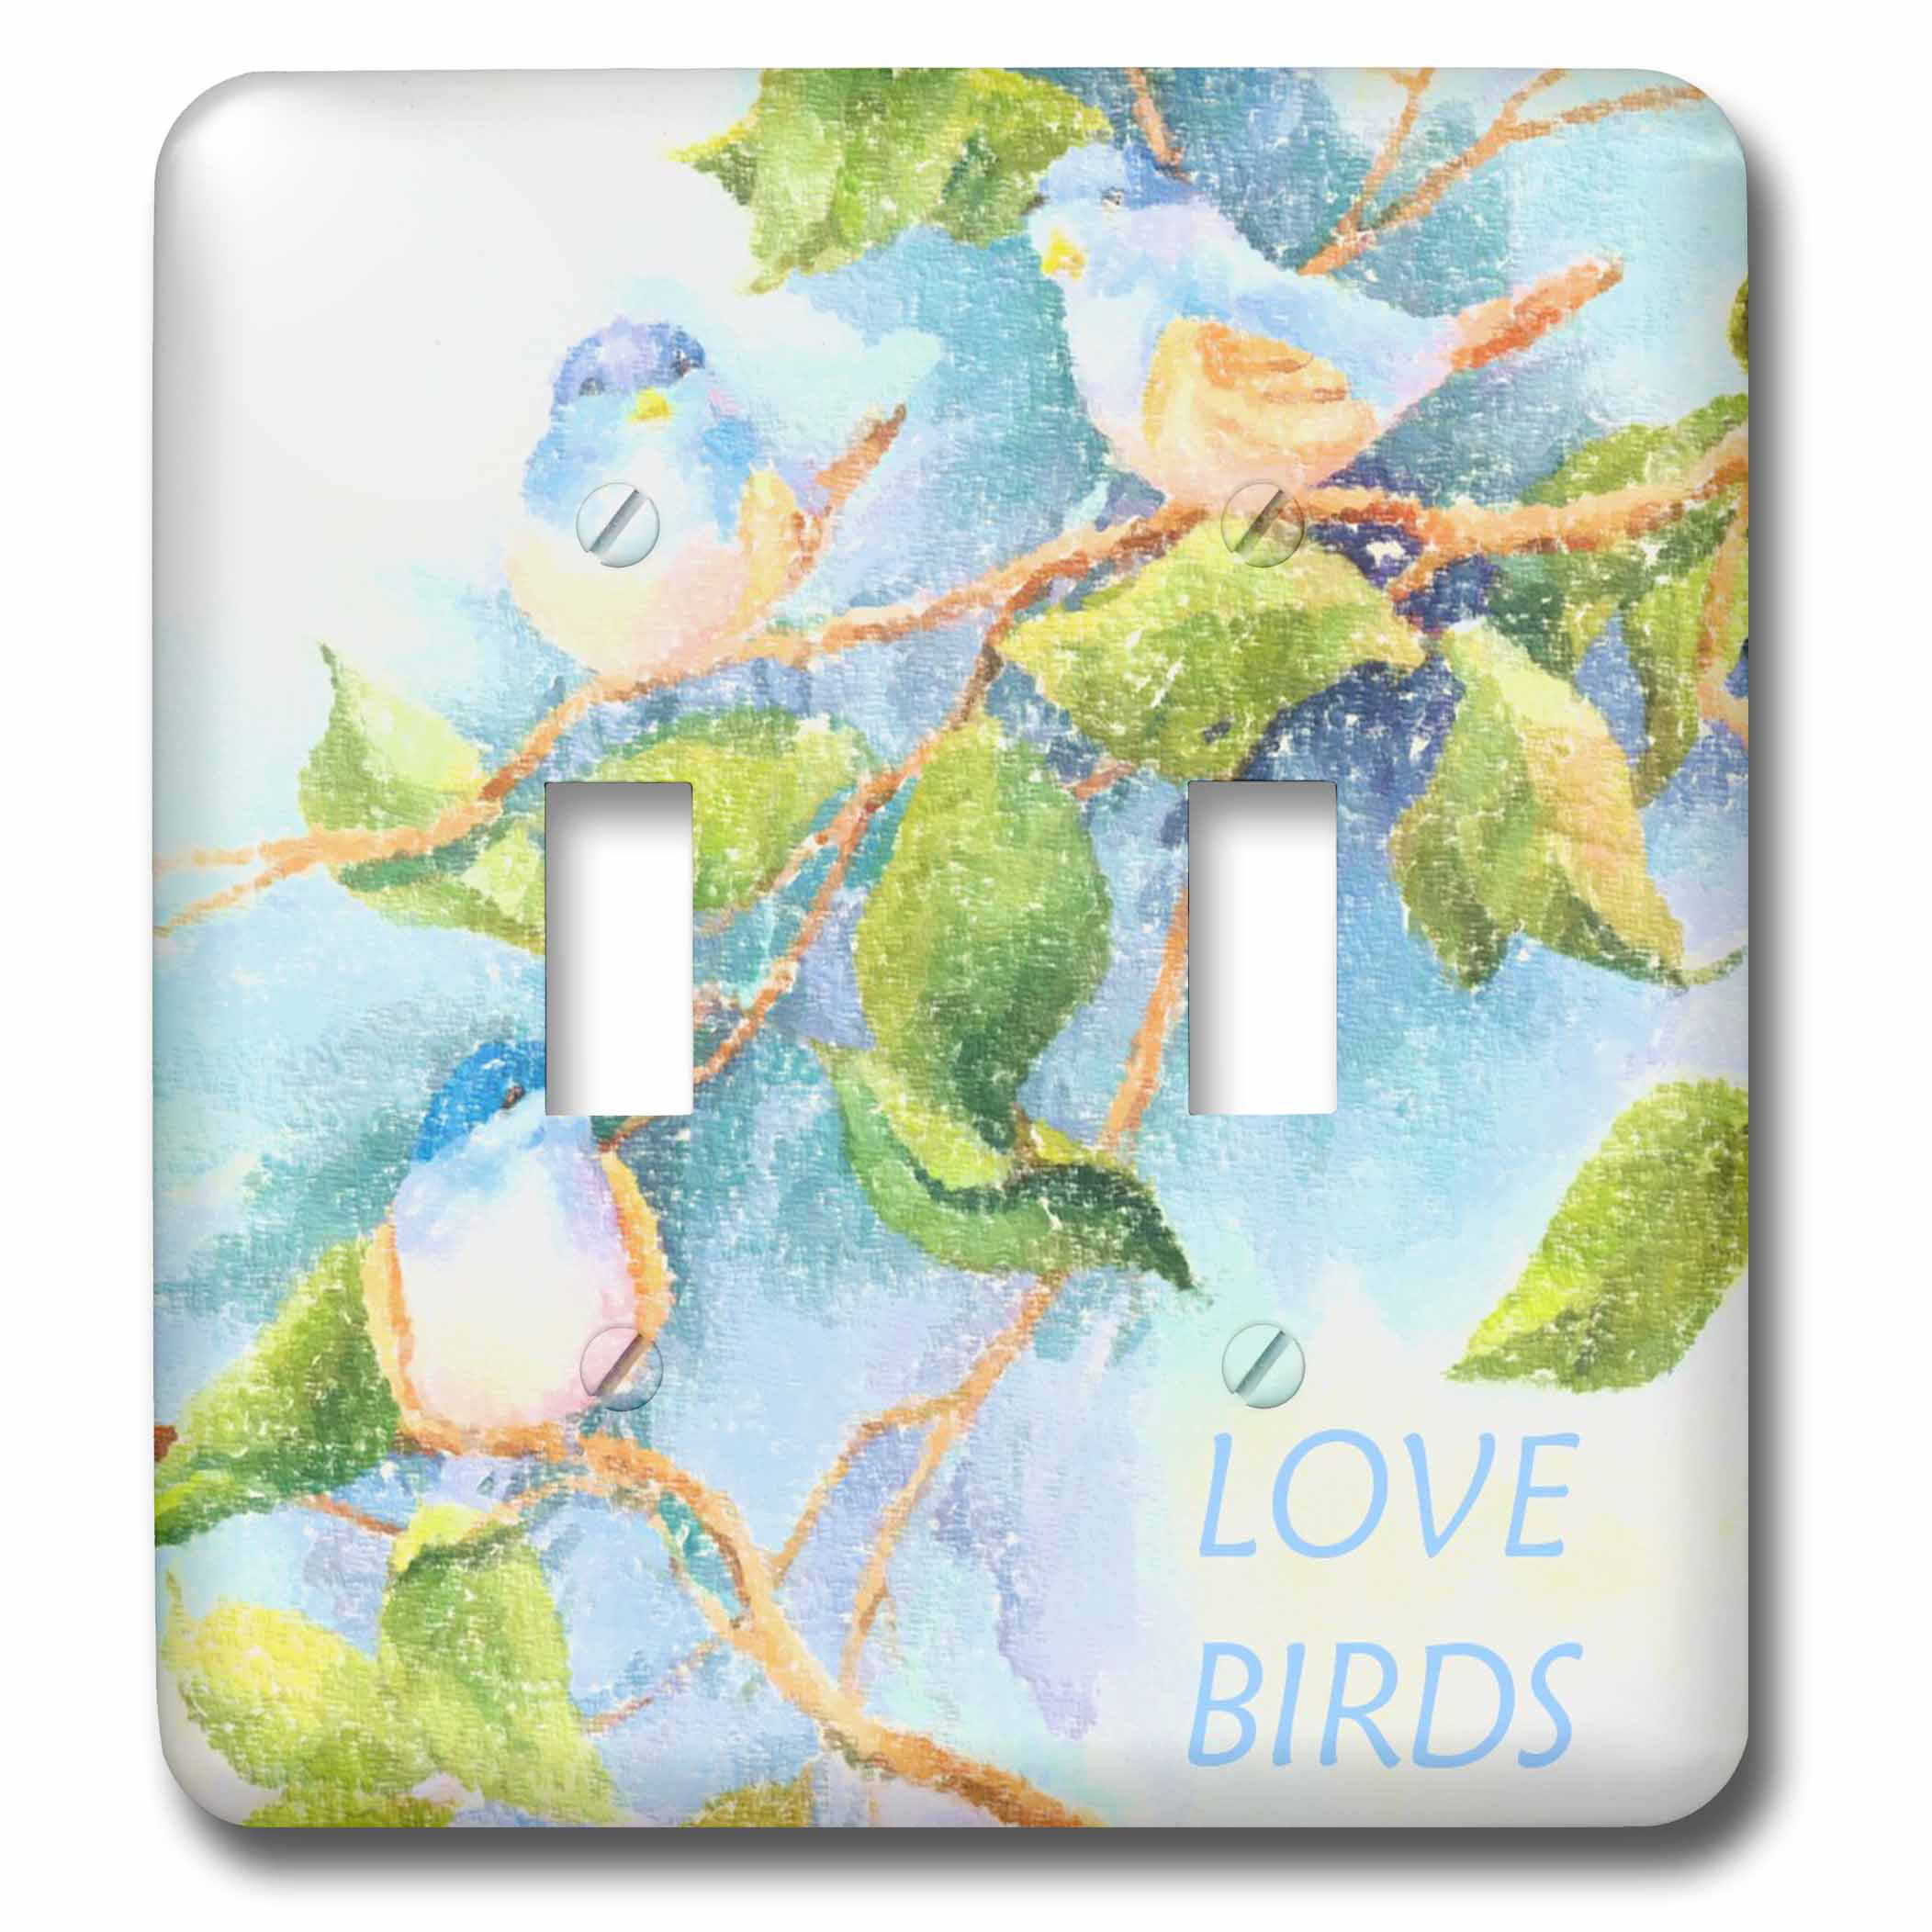 Nh Double Toggle Switch Multicolor 3dRose LSP_92348_2 Blue Heron Bird Lubber Land Creek